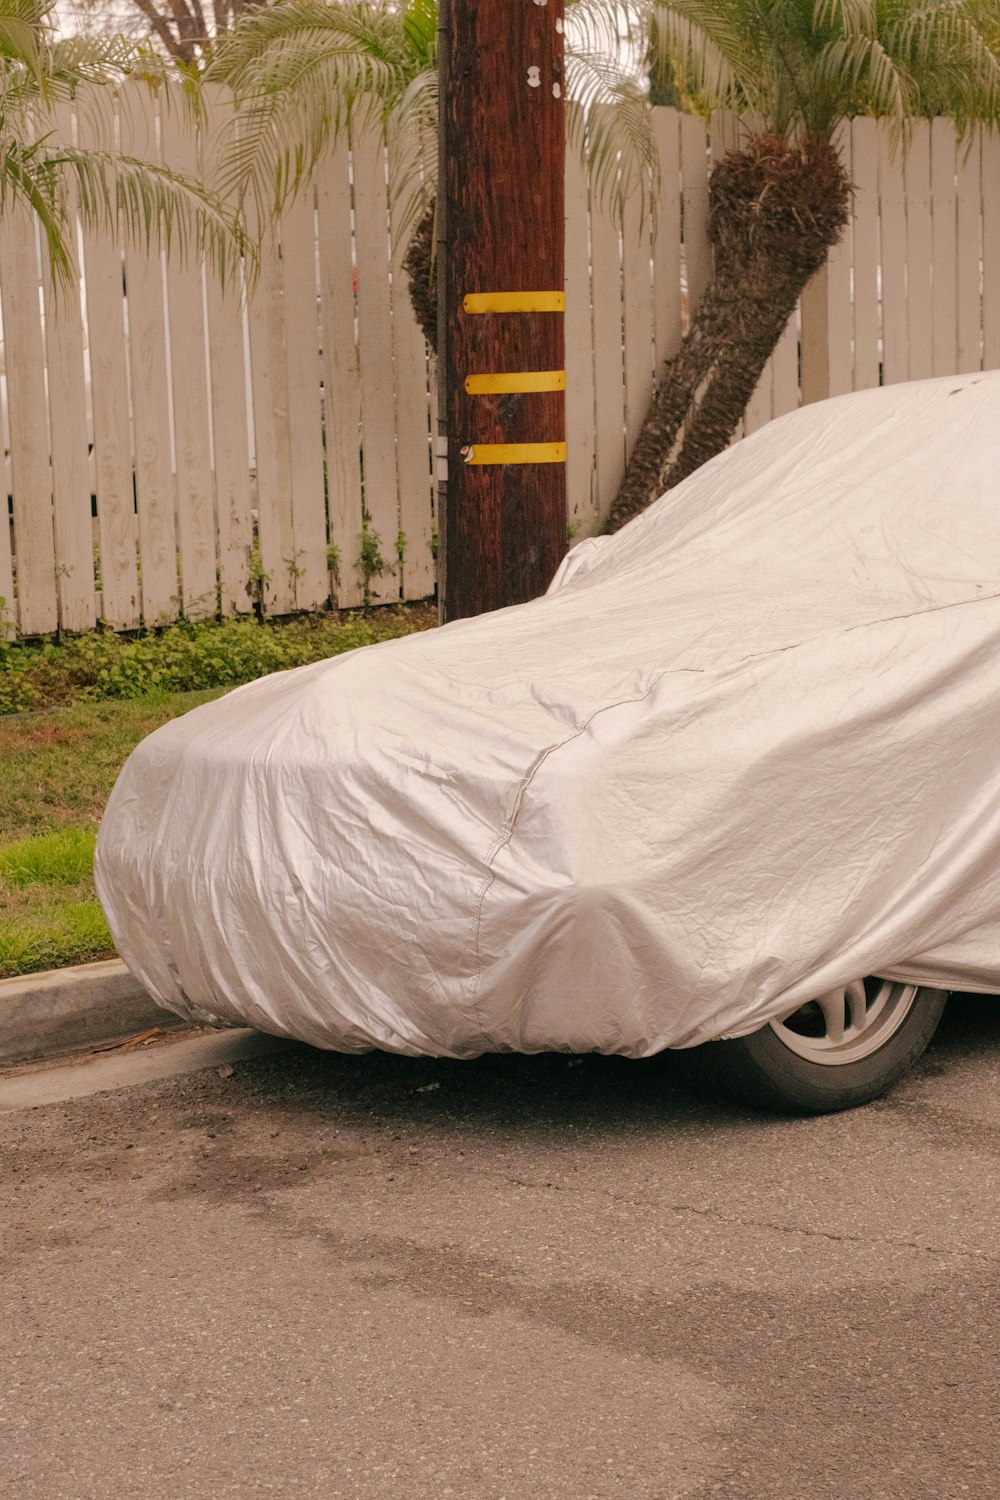 a car covered in a white sheet on the side of the road